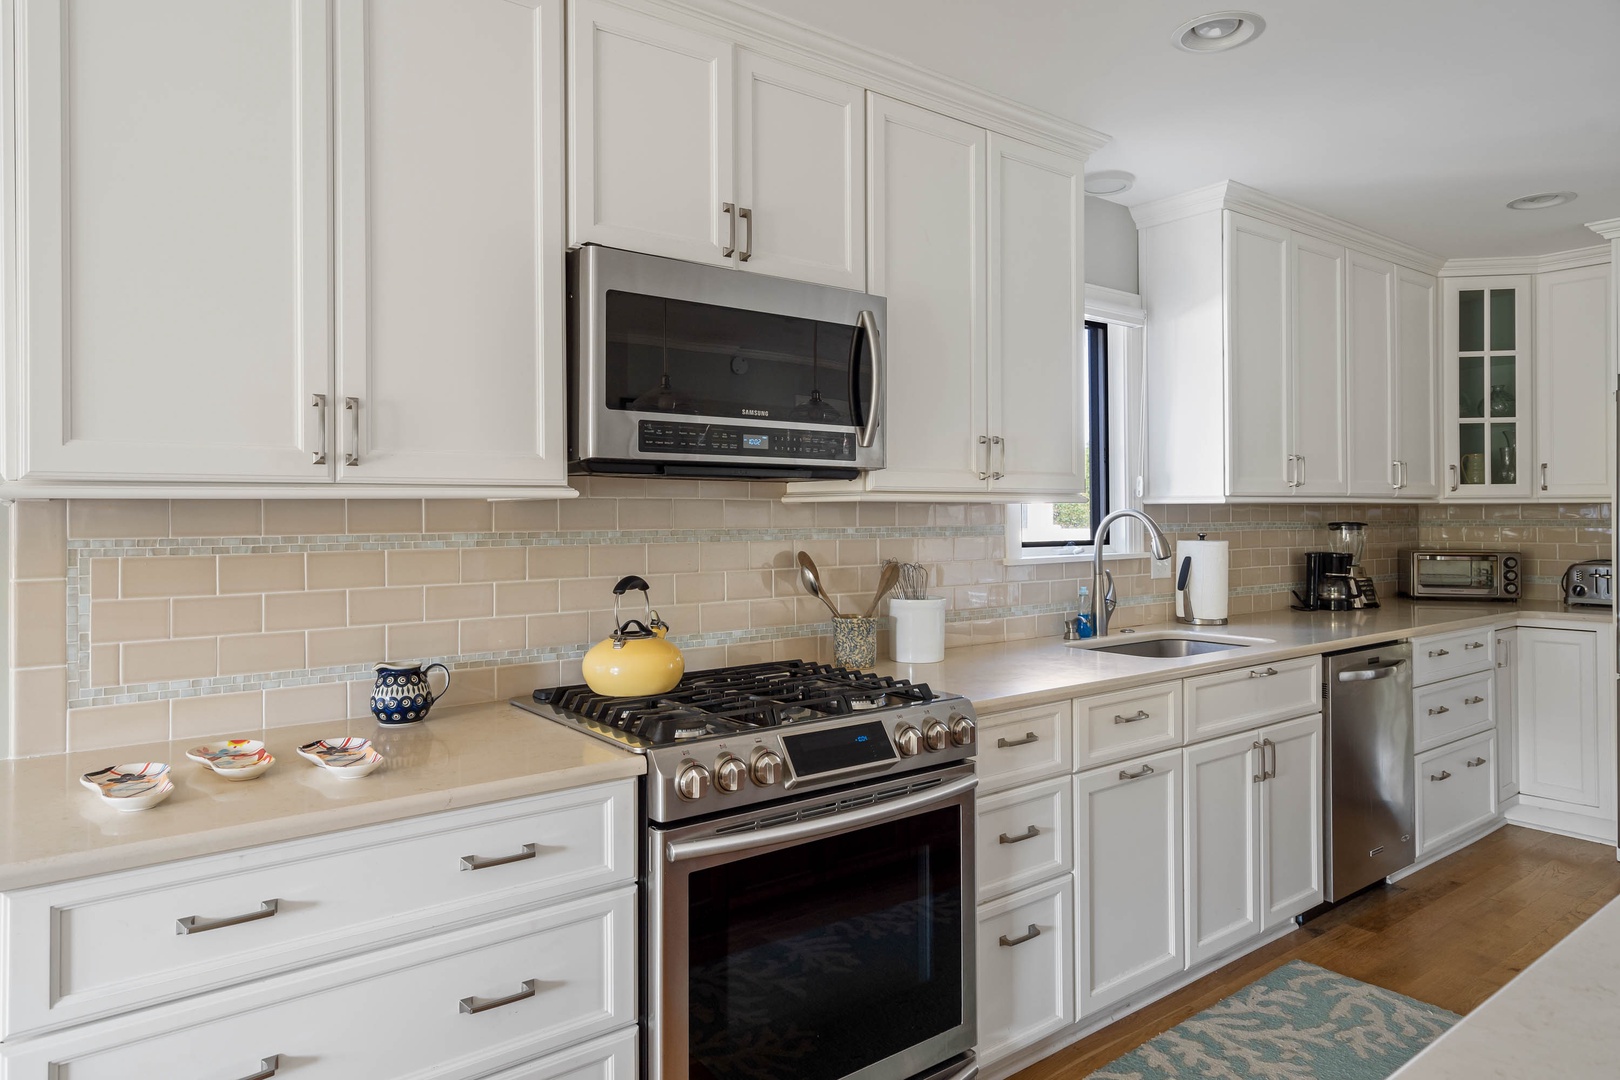 A gorgeous, open kitchen with beautiful amenities, ample storage, and plentiful counter space